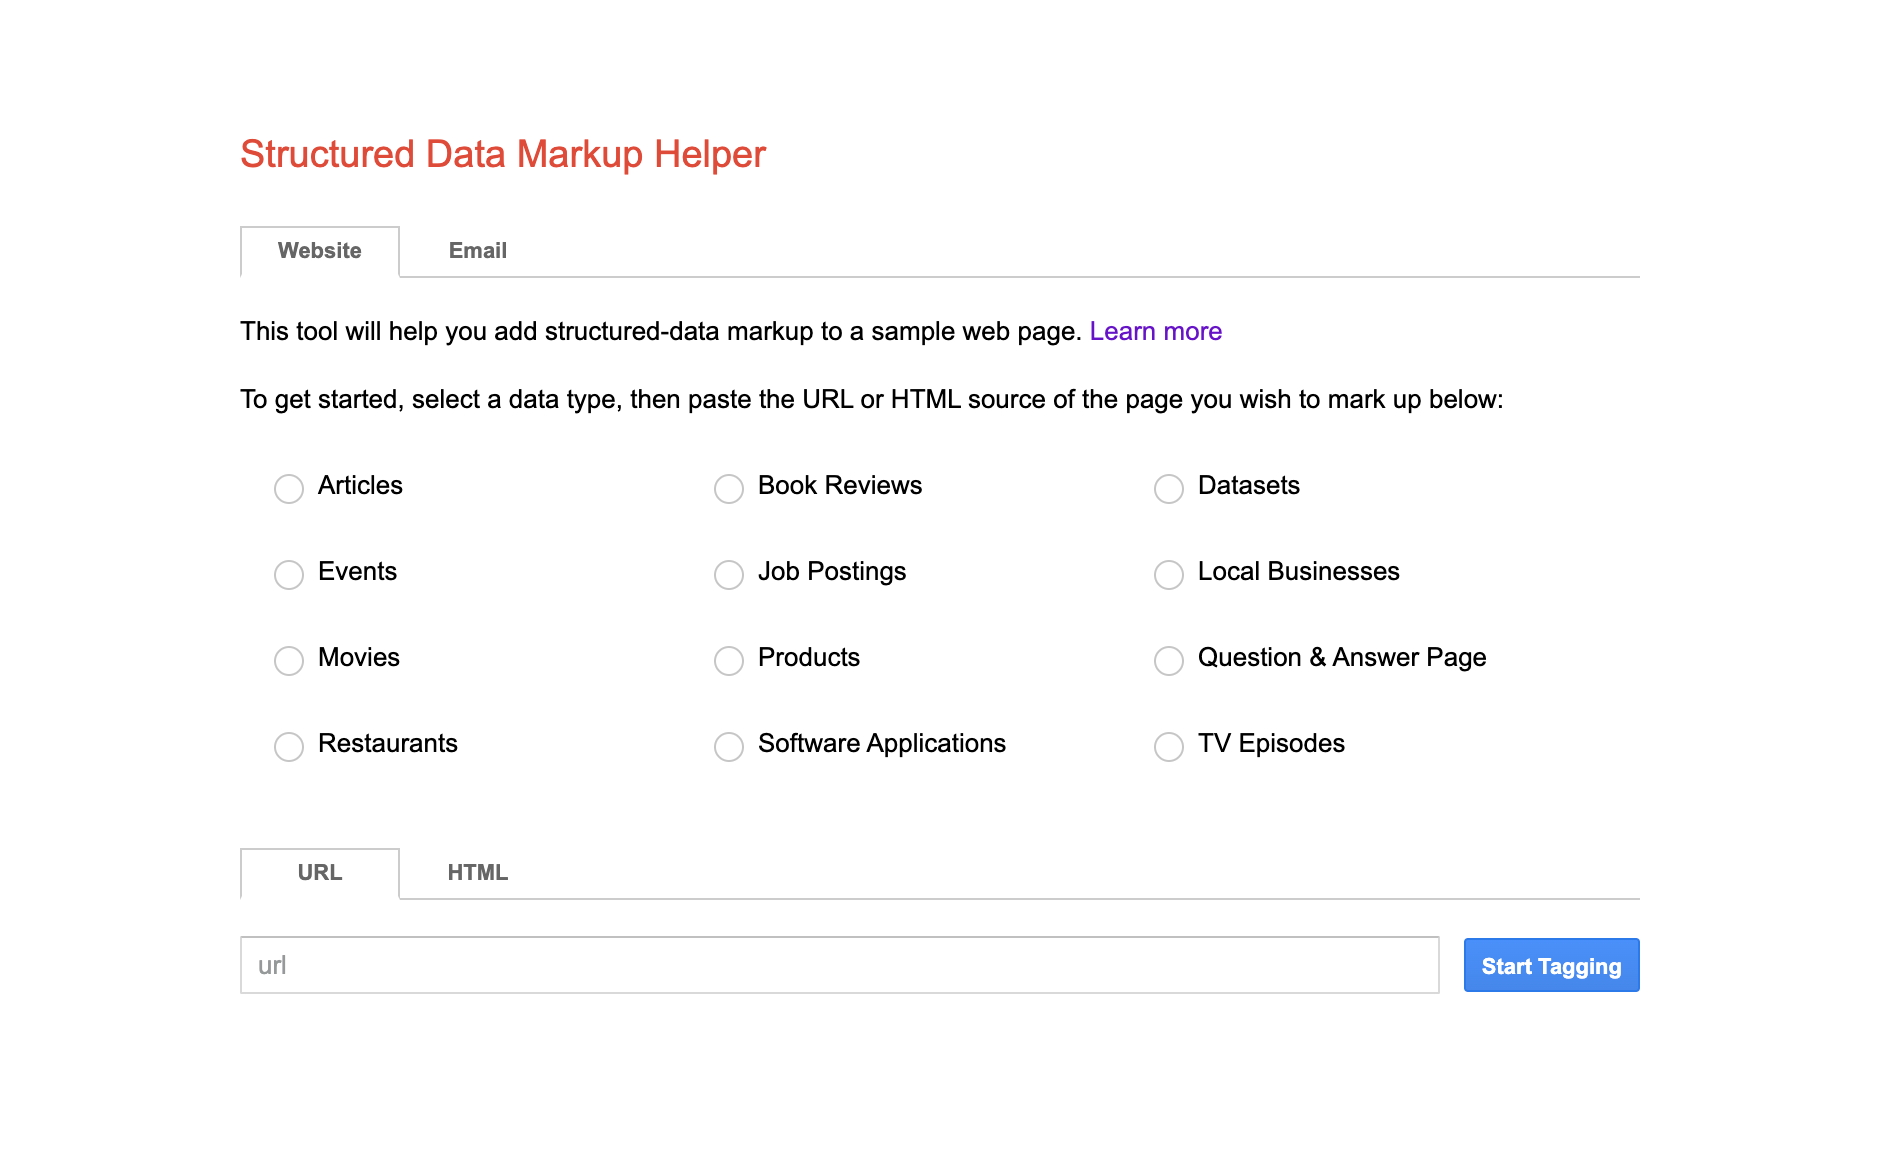 Best Structured Data Testing Tool: Google Structured Data Markup Assistant